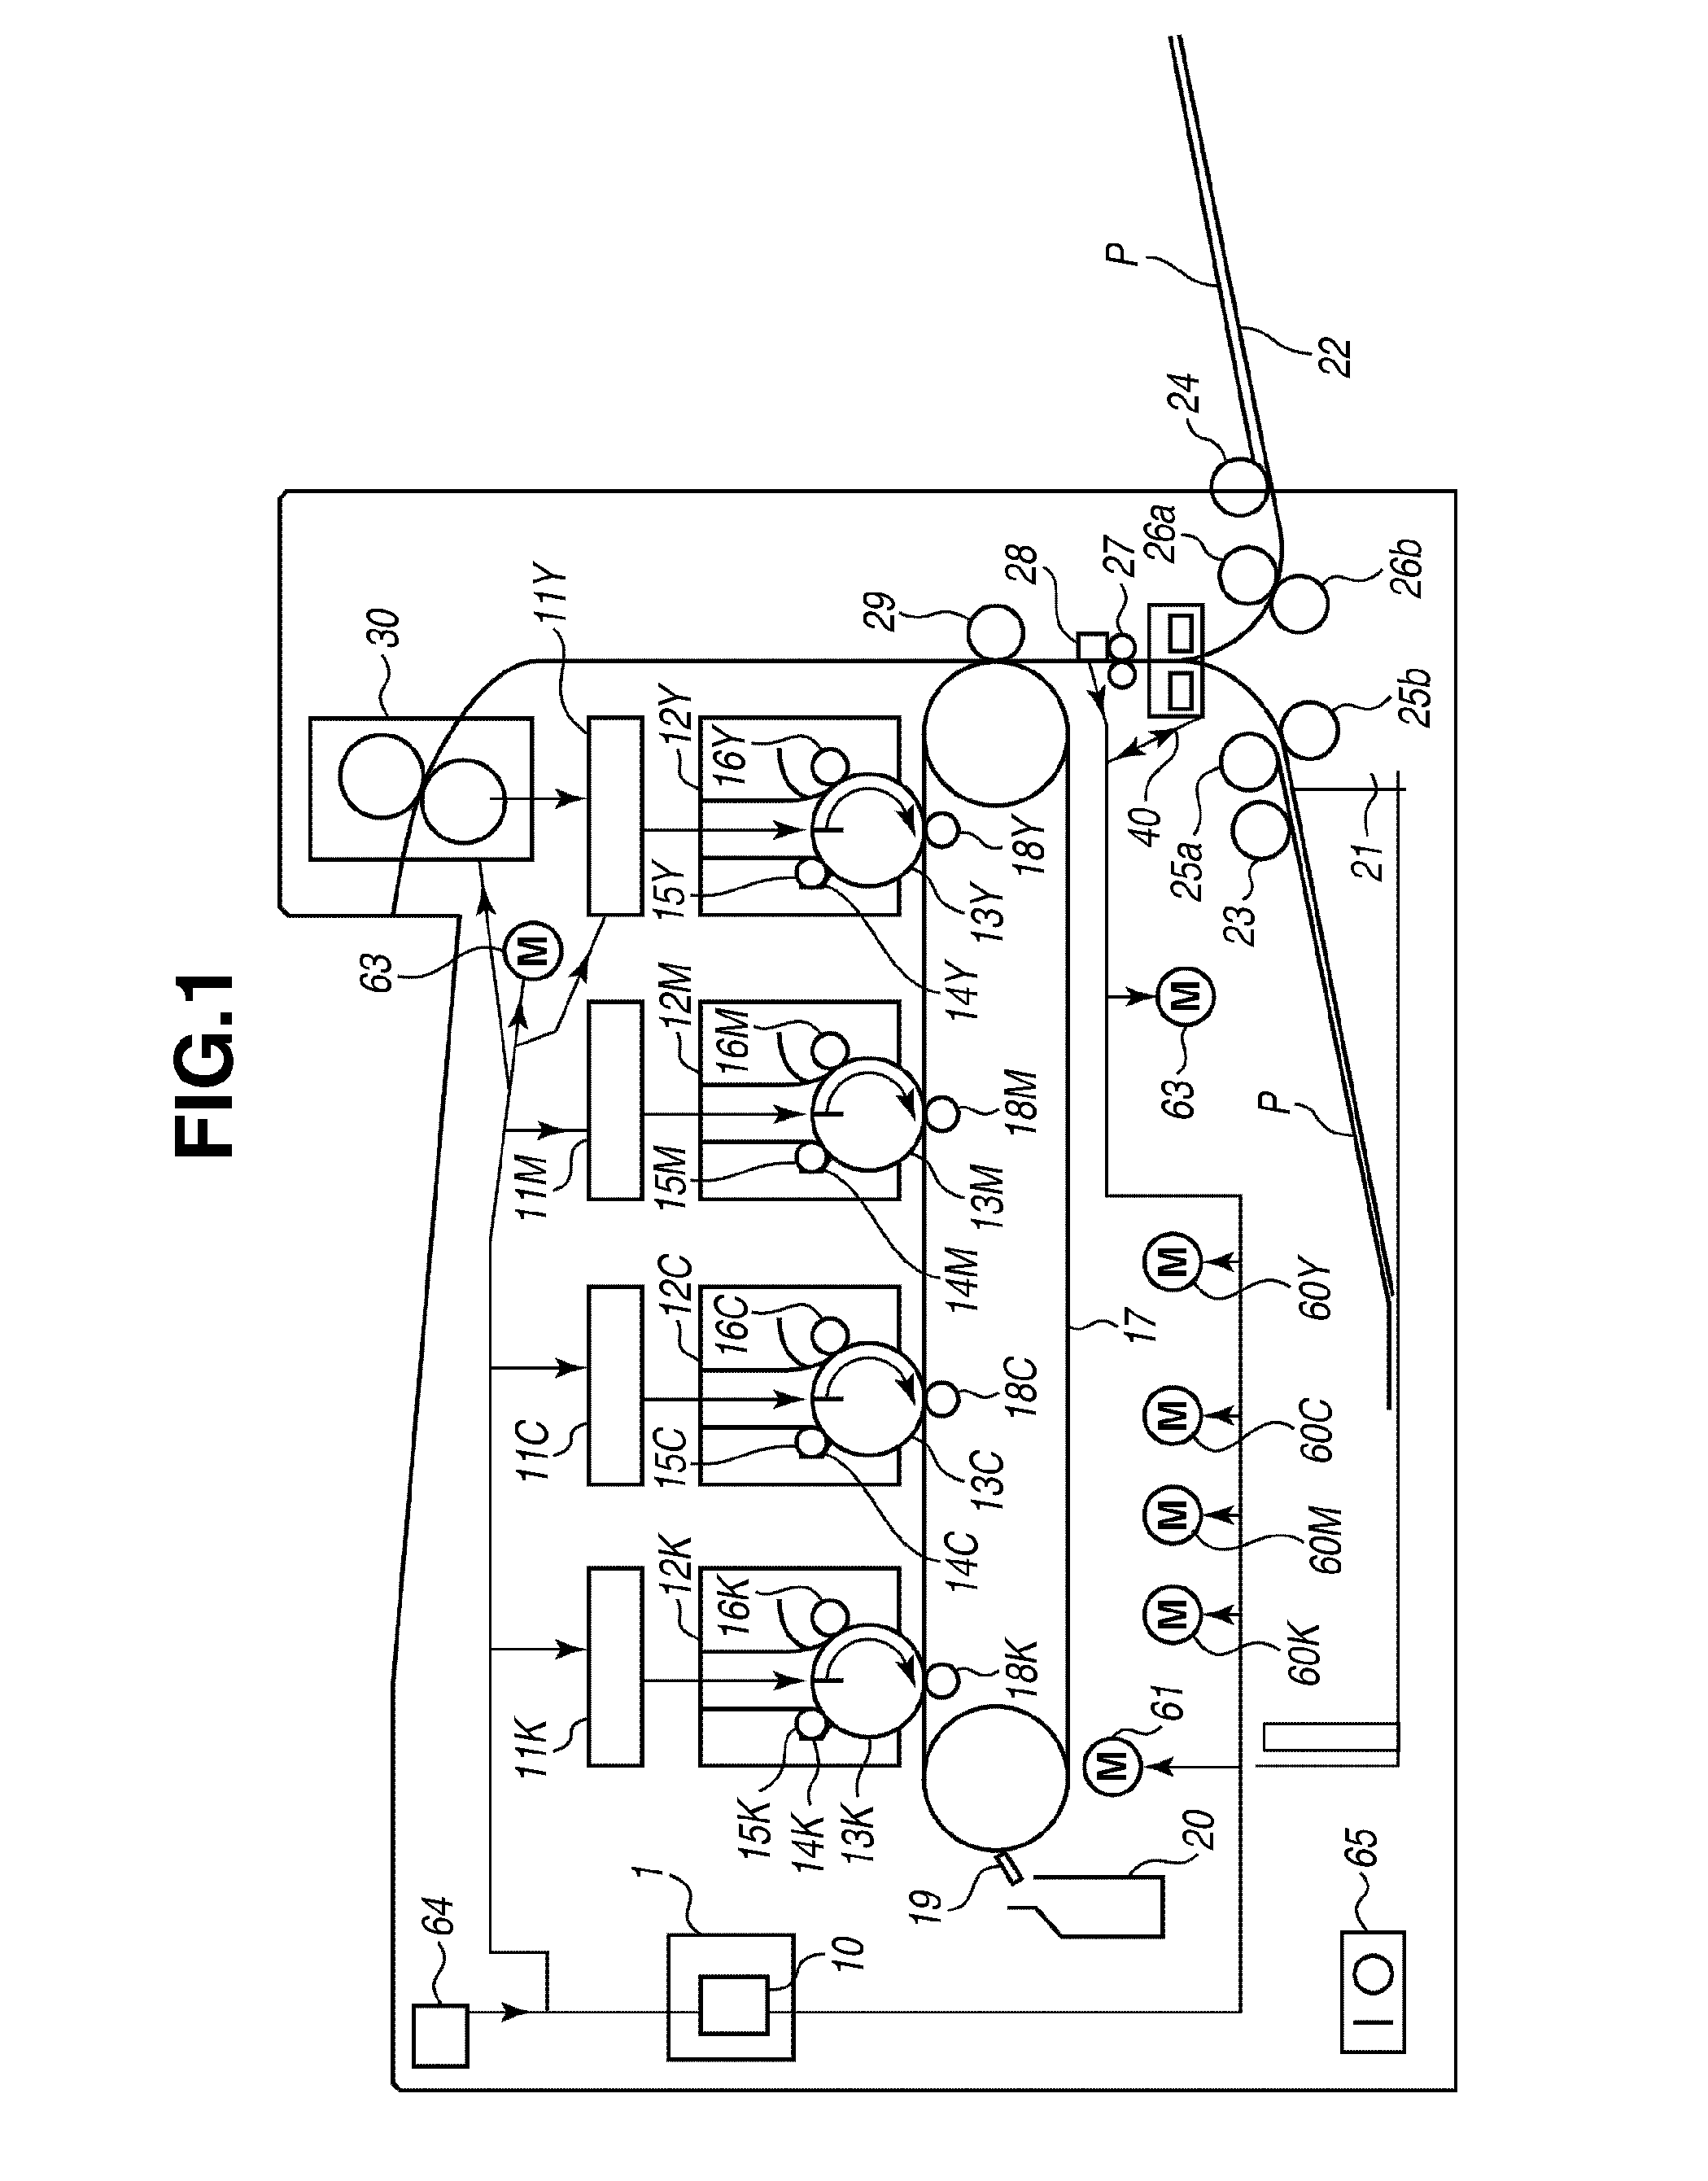 Ultrasonic wave detection apparatus, recording material determination apparatus, and image forming apparatus